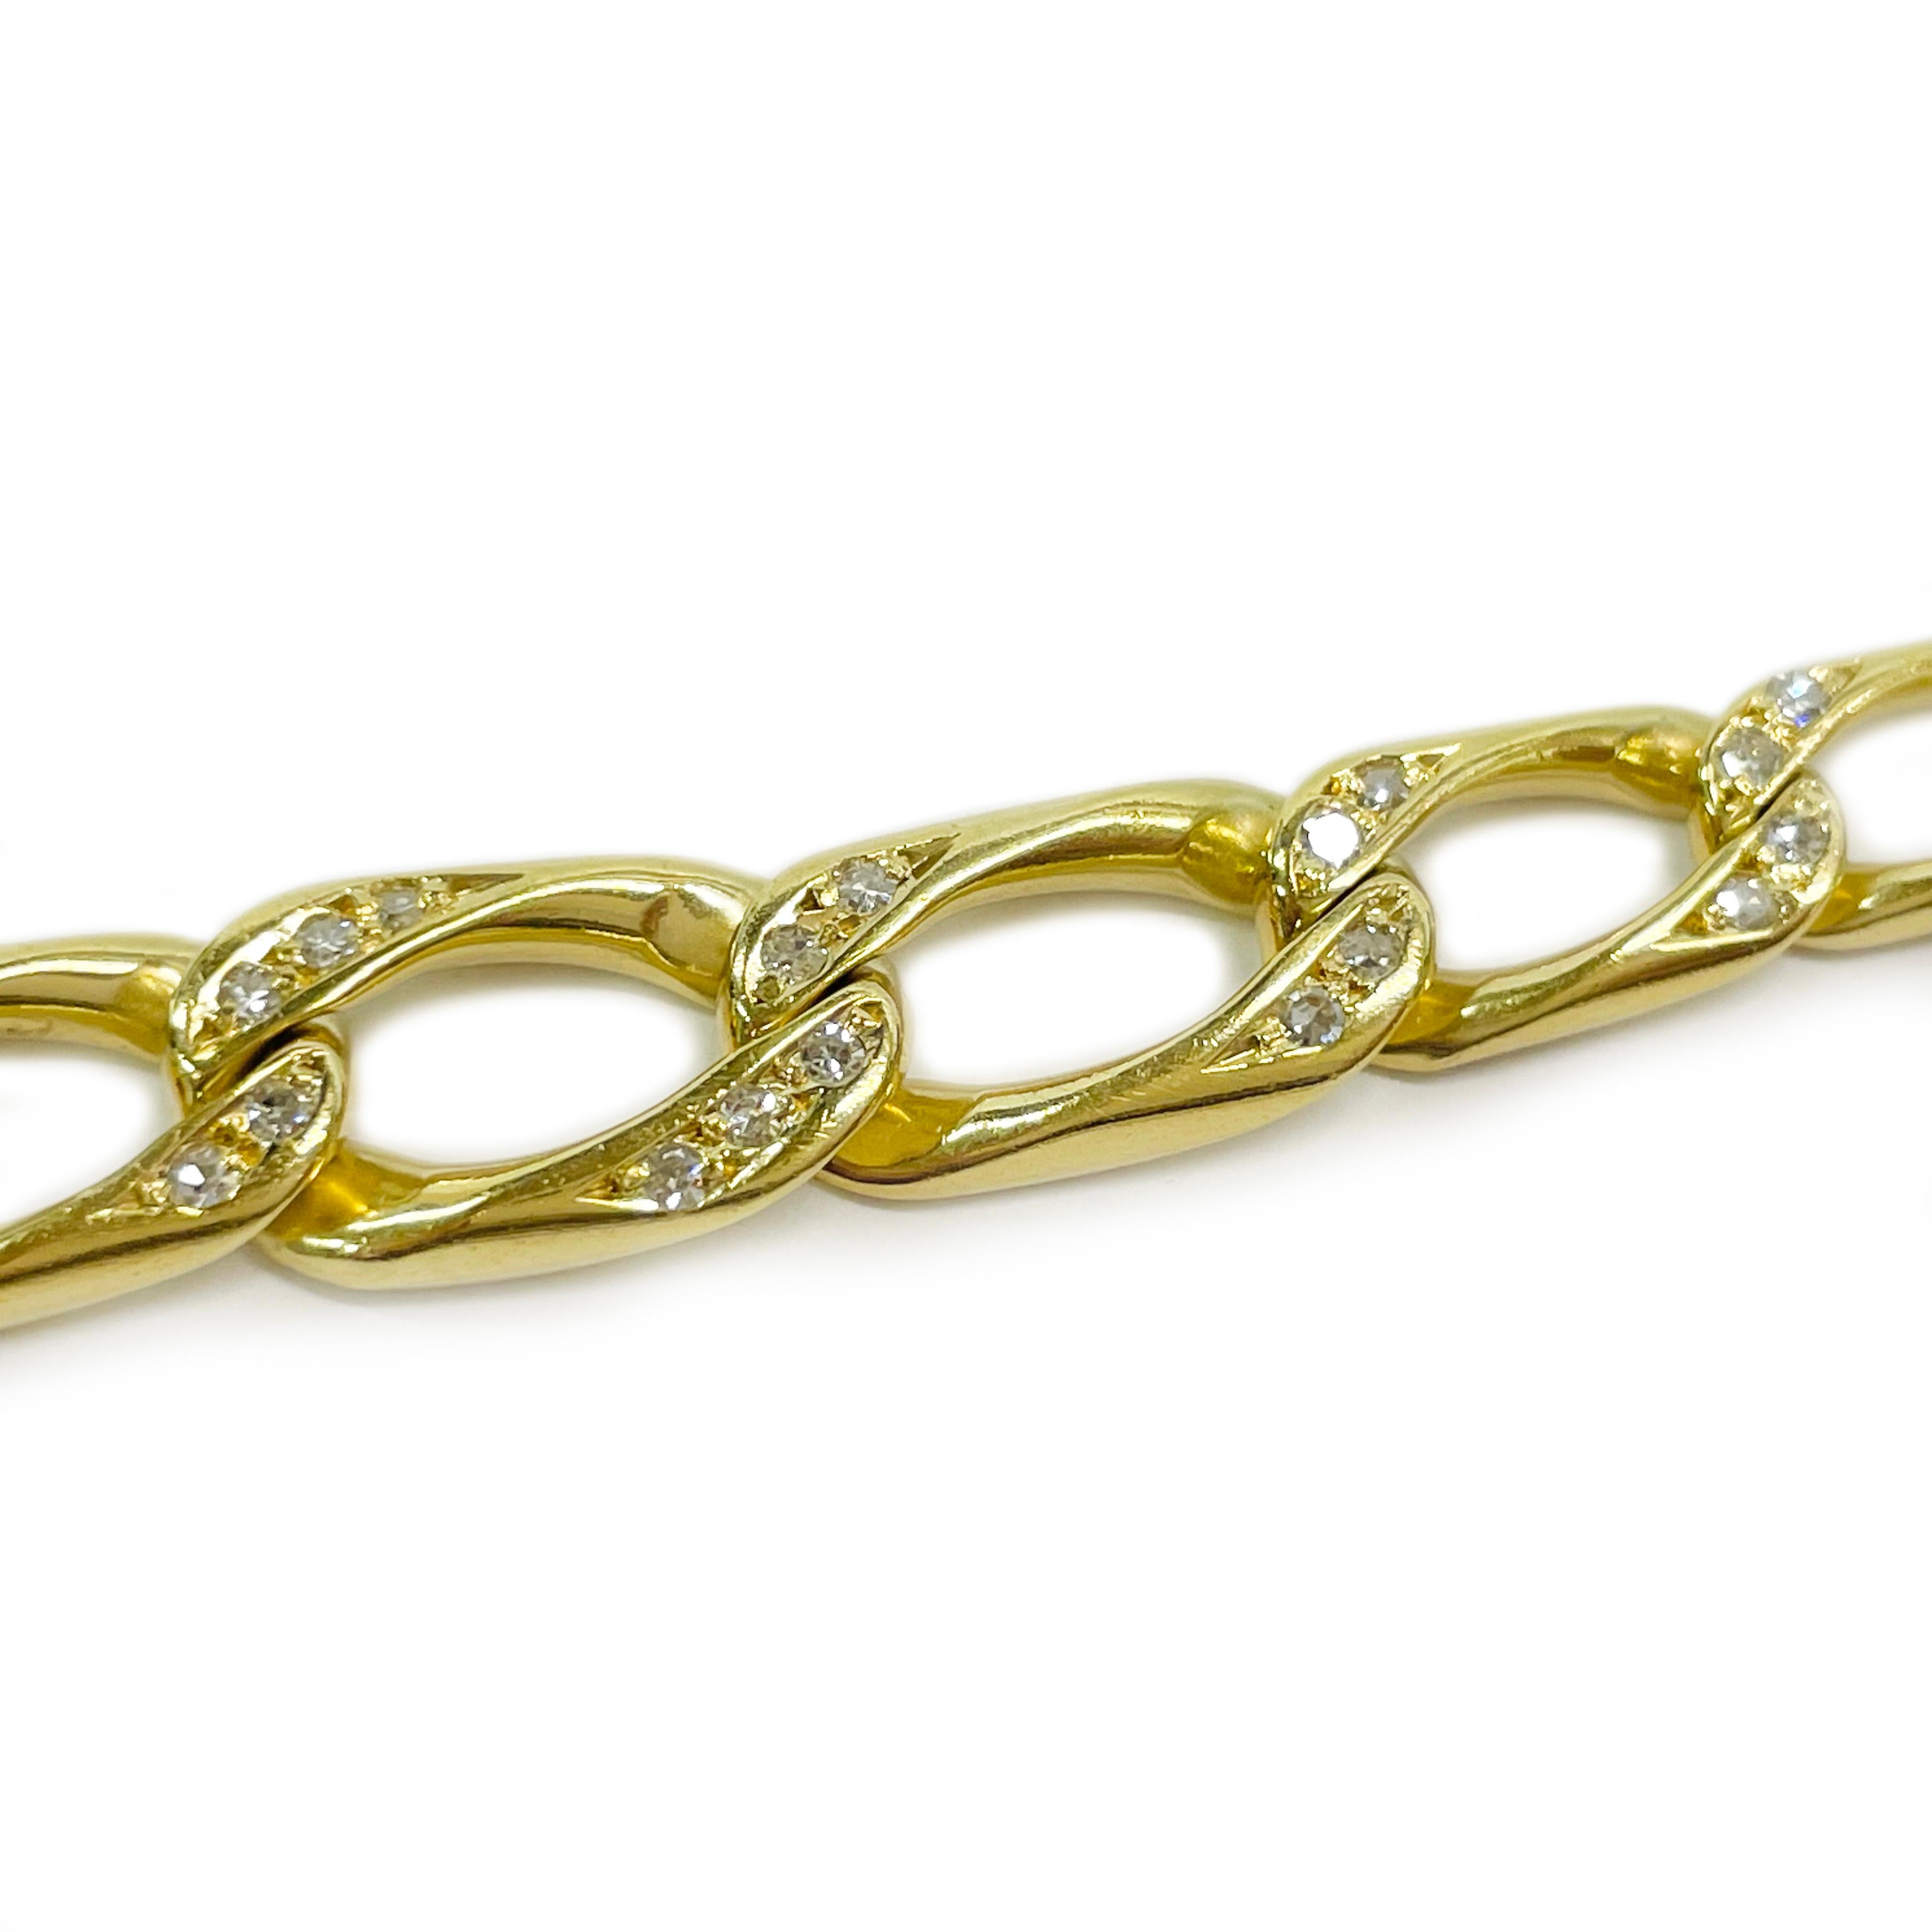 18 Karat Yellow Gold Diamond Figaro Link Bracelet. This bracelet features twenty-eight single-cut diamonds bead-set on two corners on the middle seven links. The diamonds measure 1.72mm each for a carat total weight 0.50ctw. The diamonds are SI1-SI2